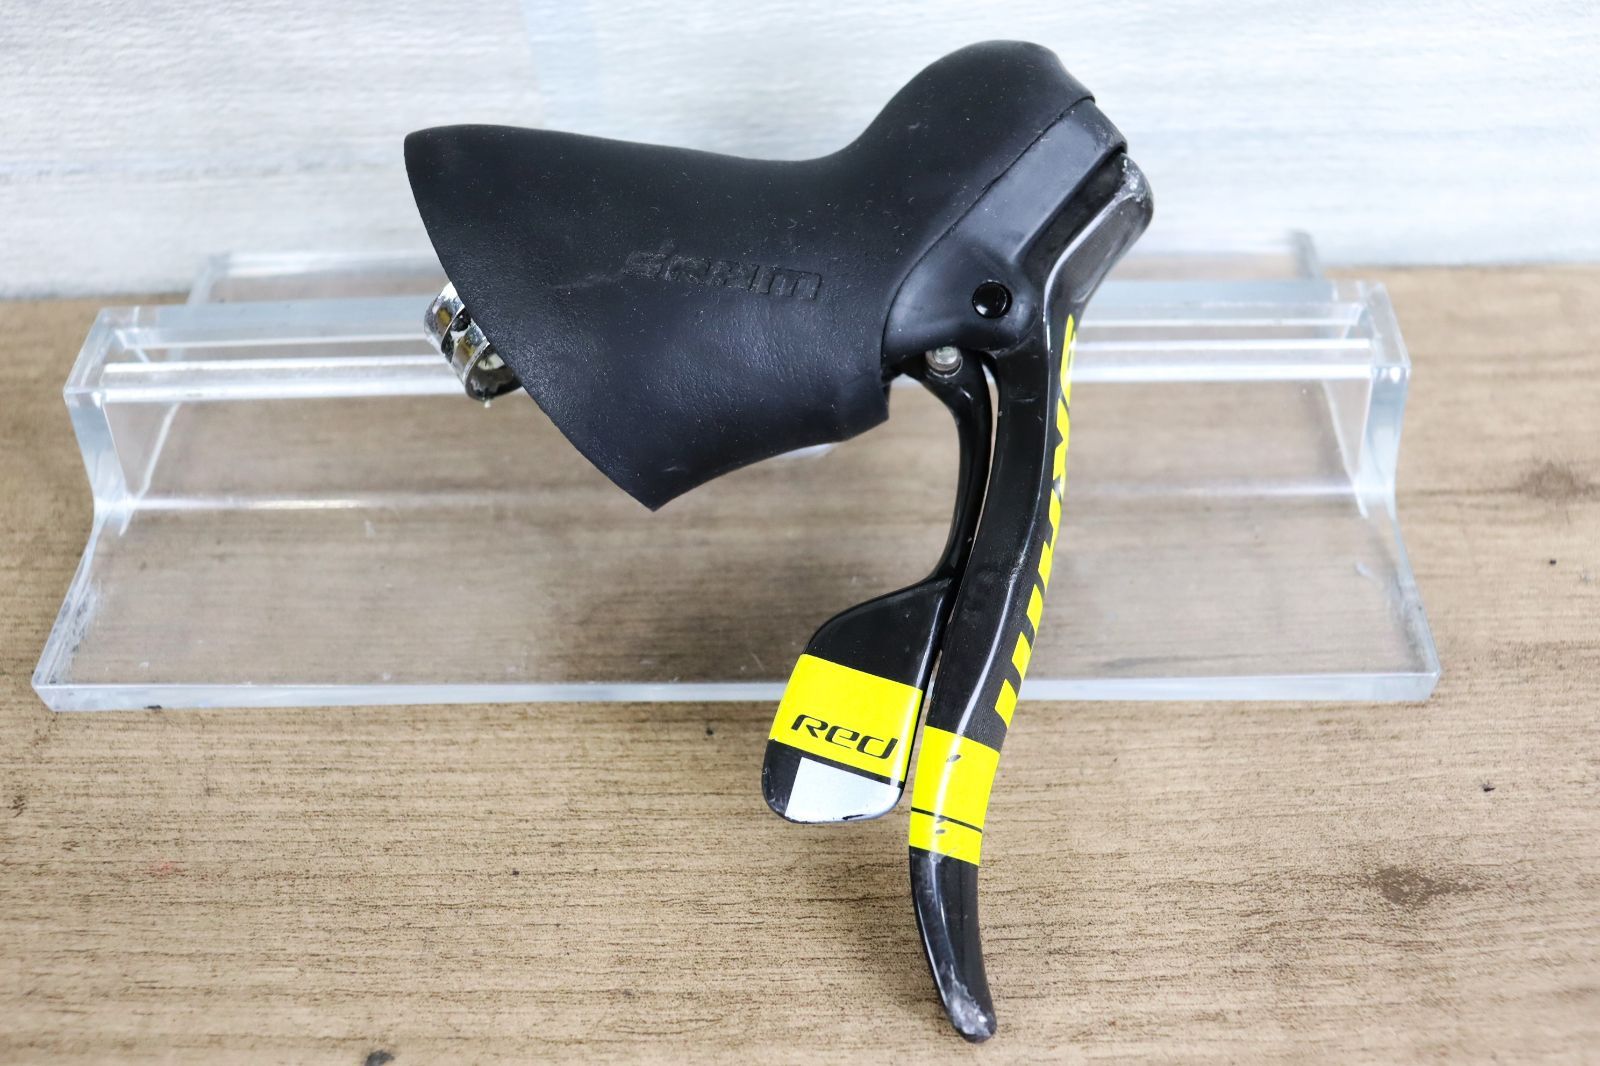 87 SRAM Red Yellow Limited Tour Edition スラム レッド イエロー 